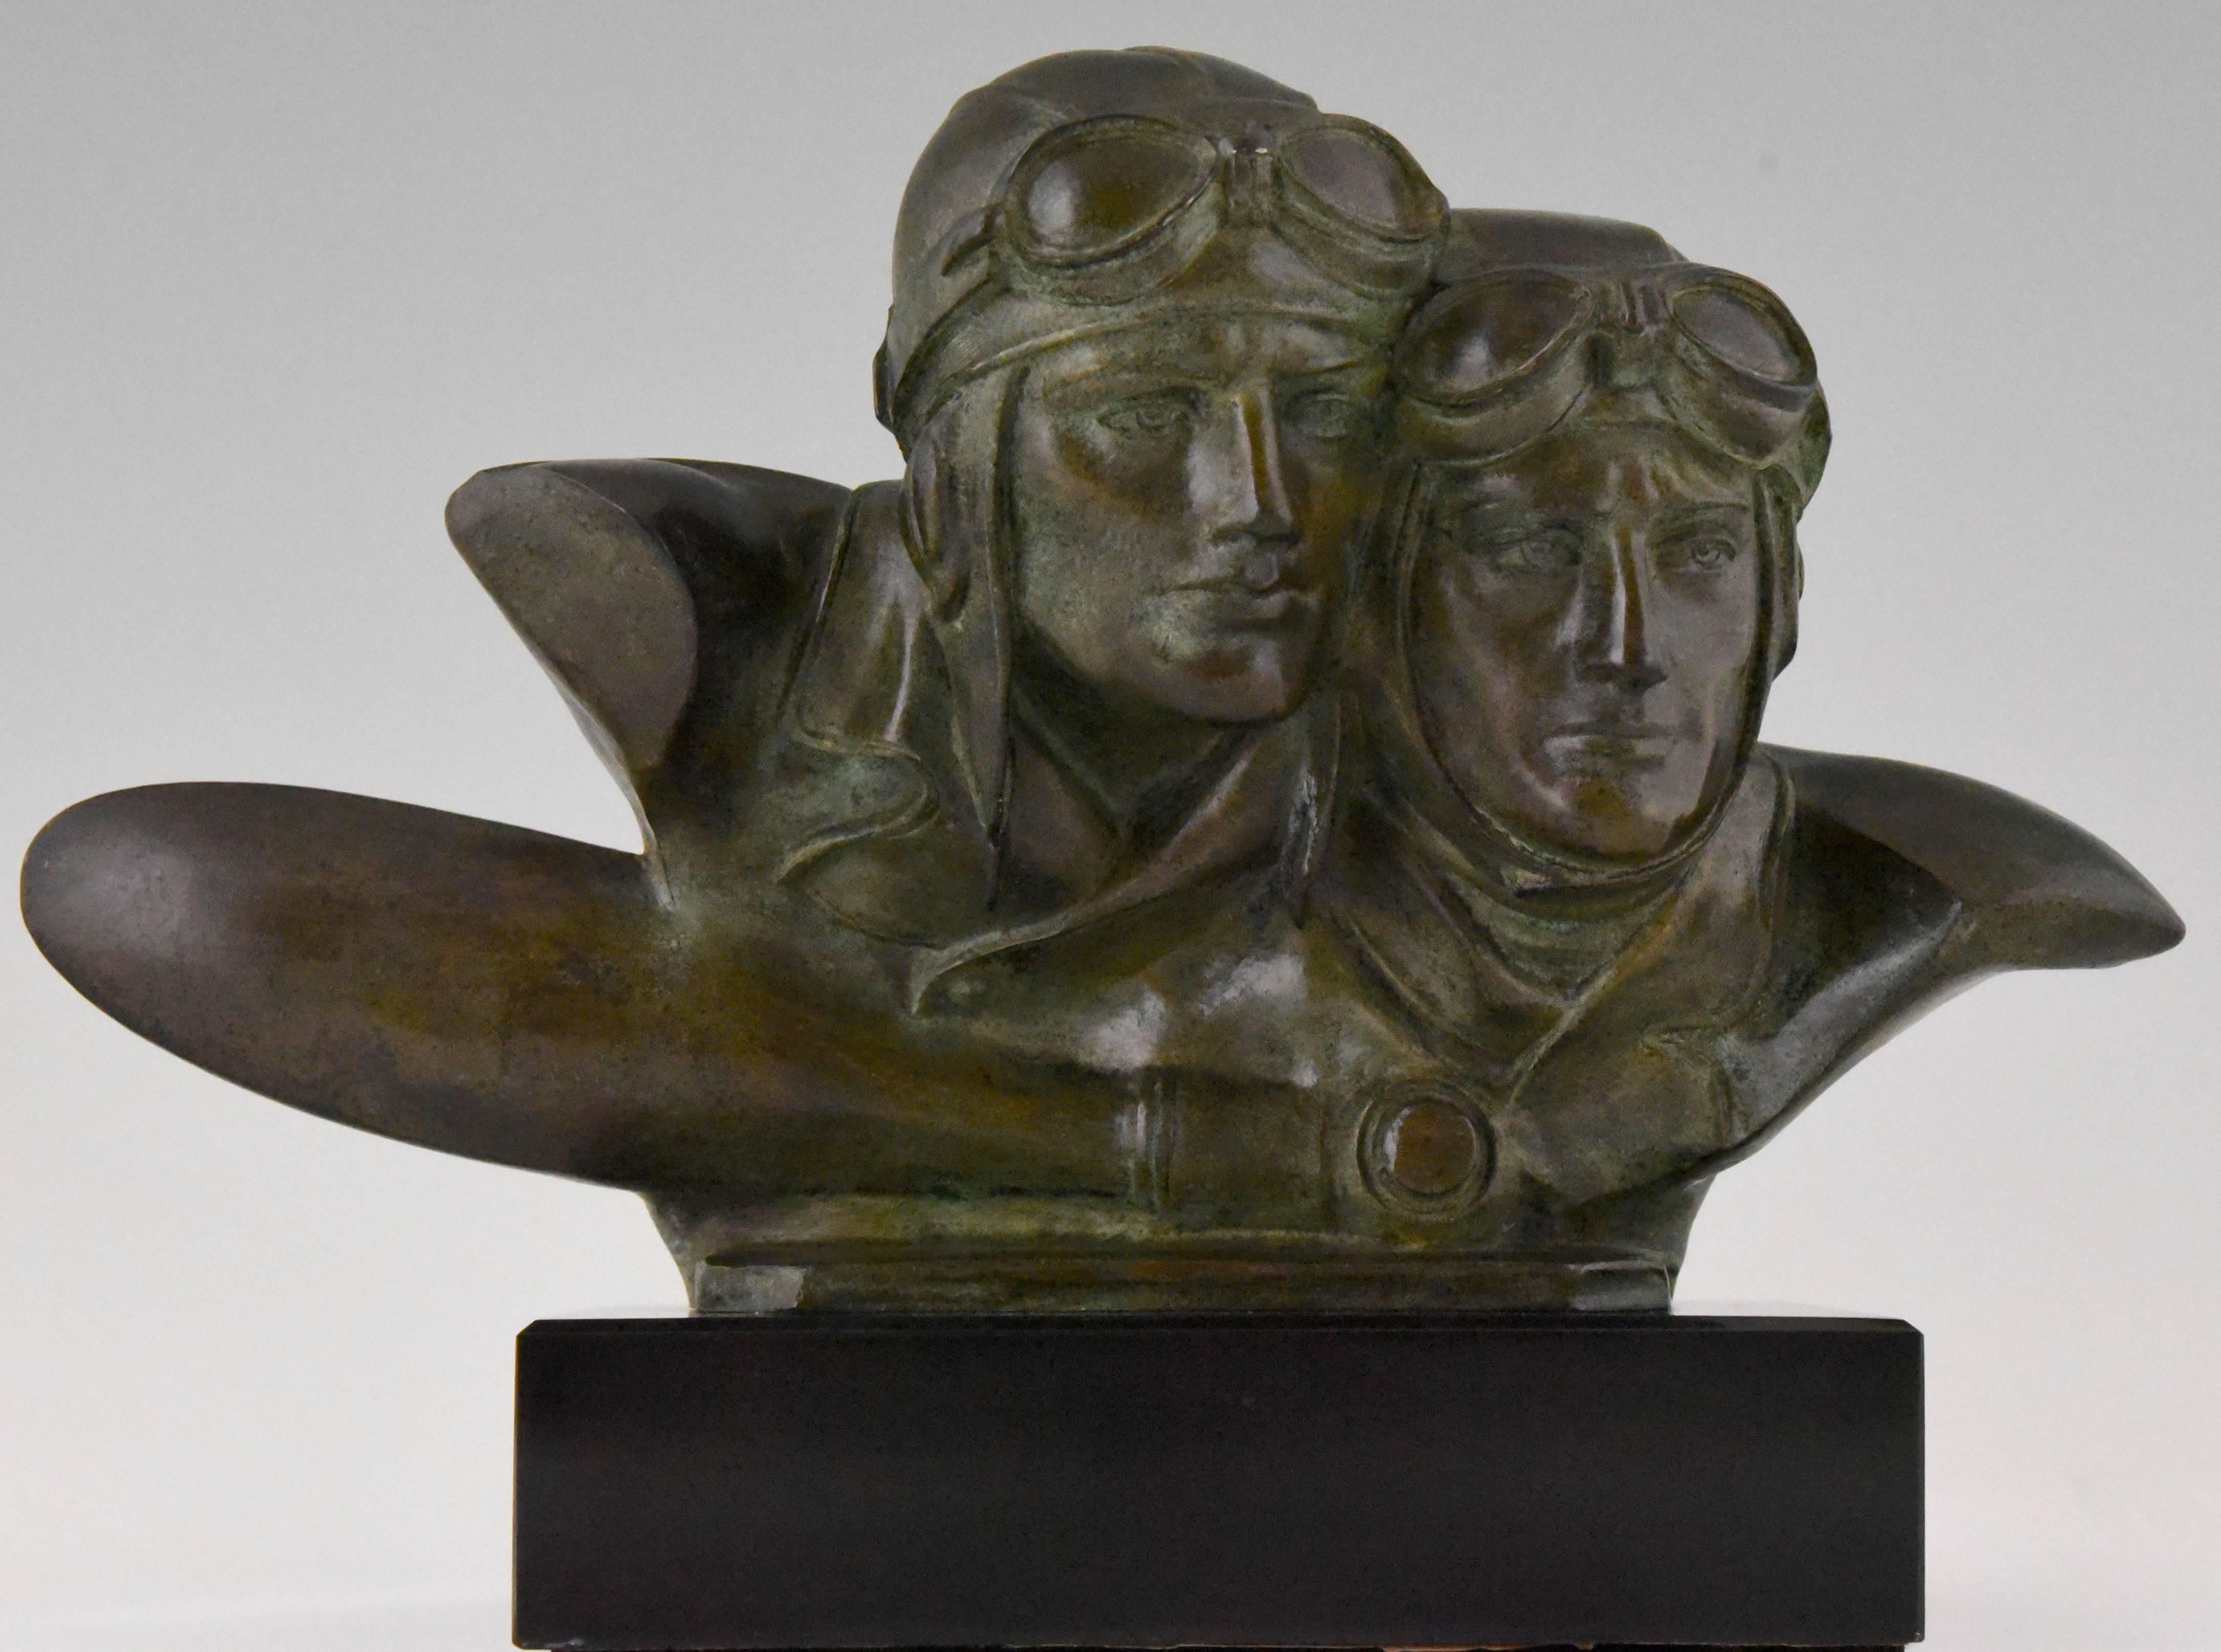 Hard to find Art Deco bronze bust of Costes and Bellonte.
Dieudonne Costes was the pilot and Maurice Bellonte the navigator and radio operator on the first nonstop transatlantic airplane flight from Paris to New York in 1930.
Style: Art